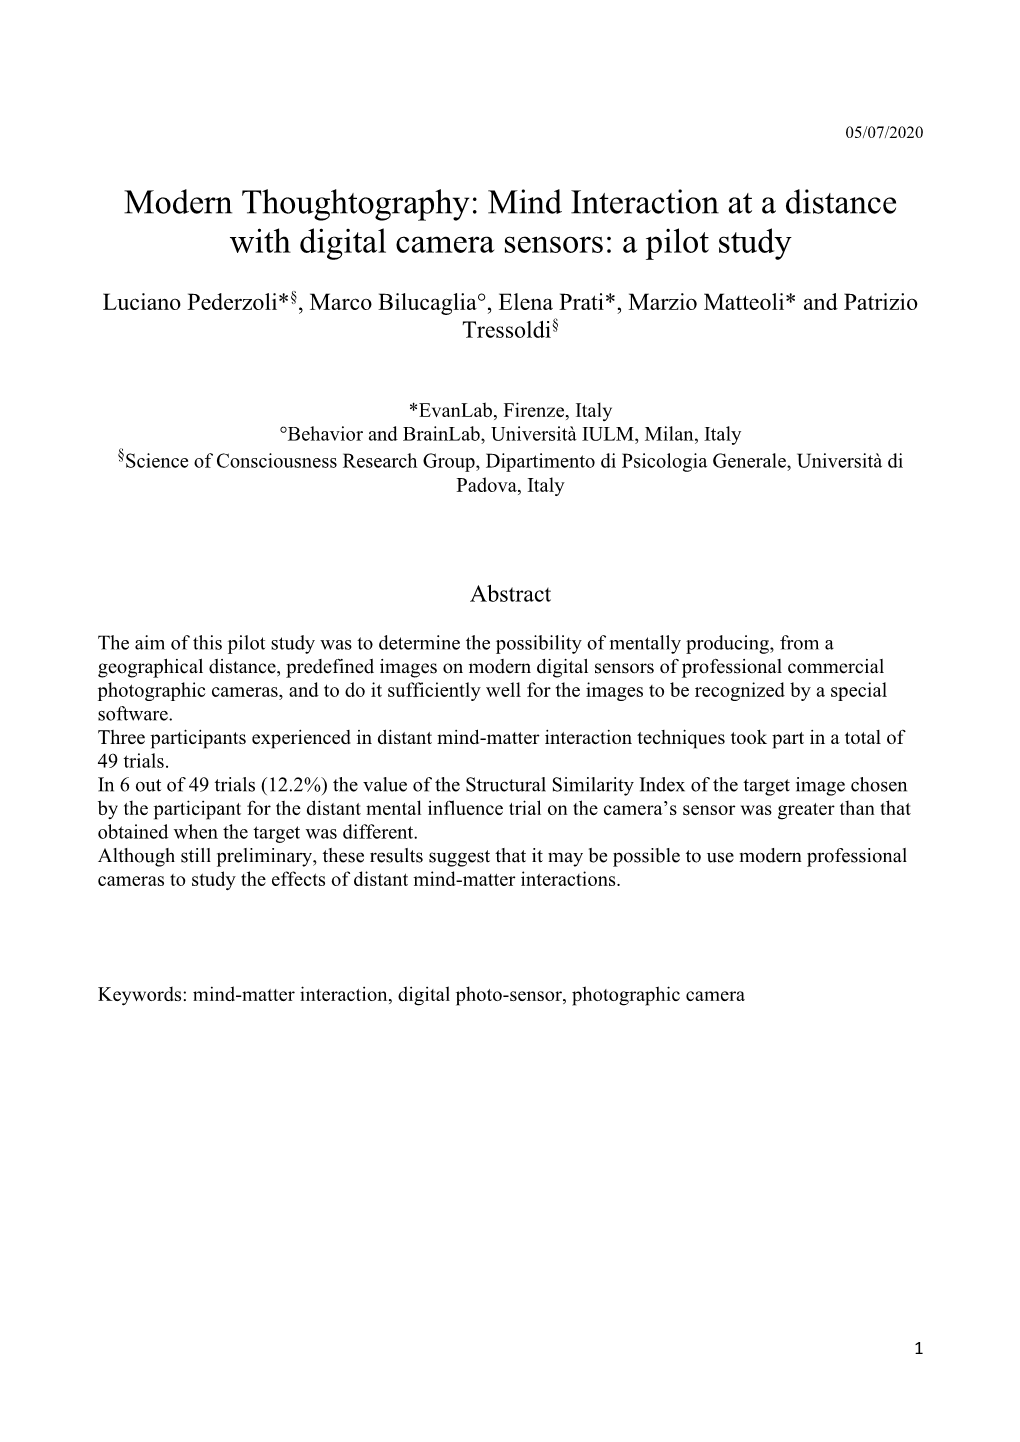 Modern Thoughtography: Mind Interaction at a Distance with Digital Camera Sensors: a Pilot Study